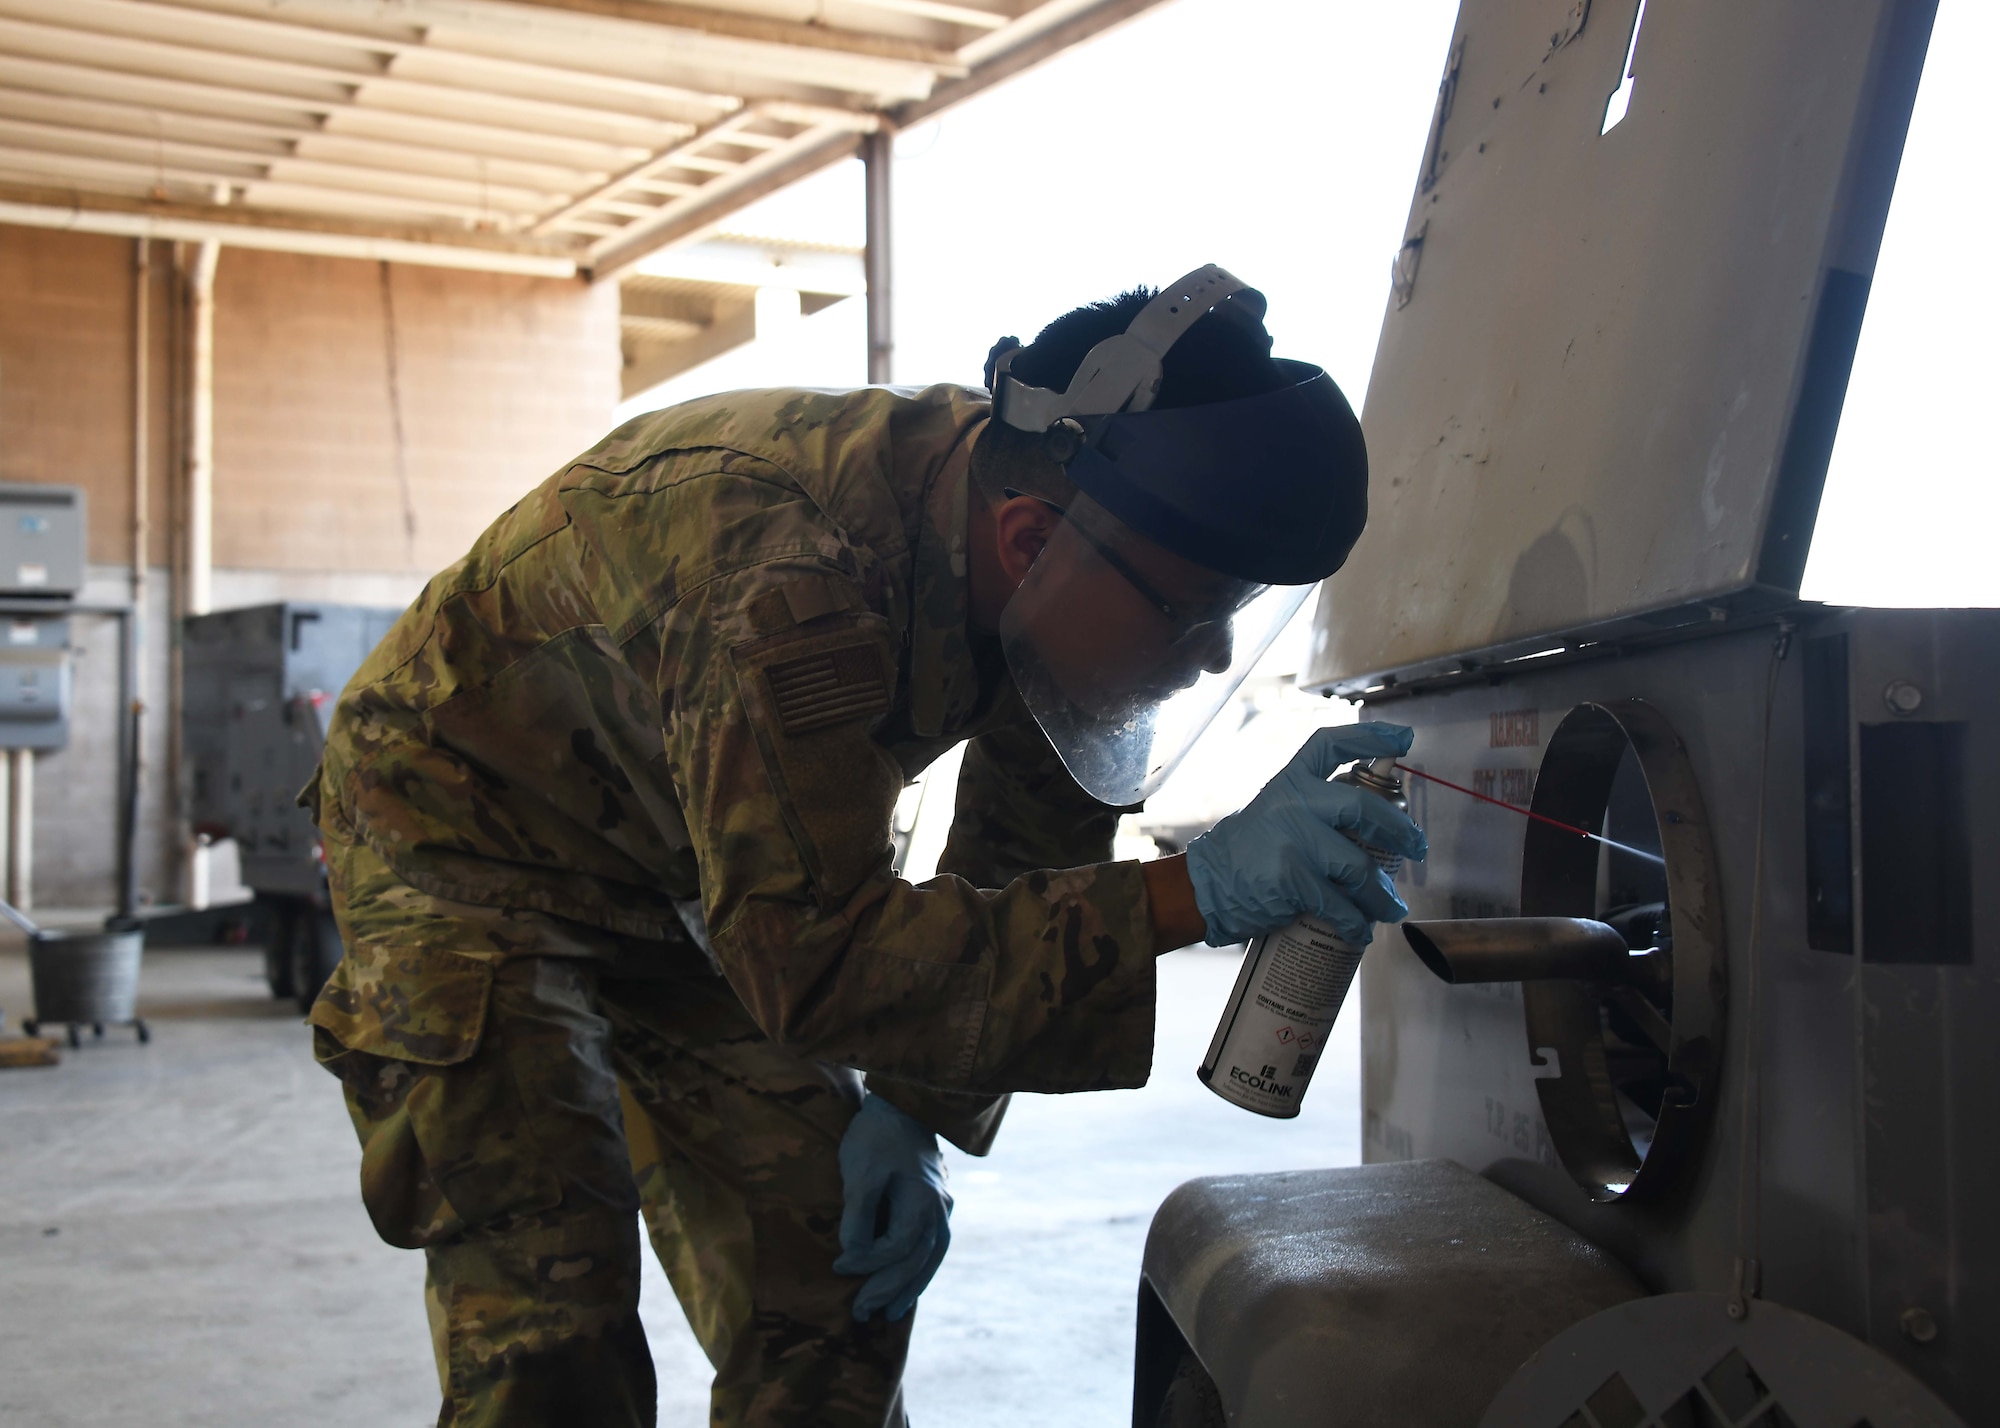 A US service member wearing green camo uses a spray can to clean the inside of a metallic machine.